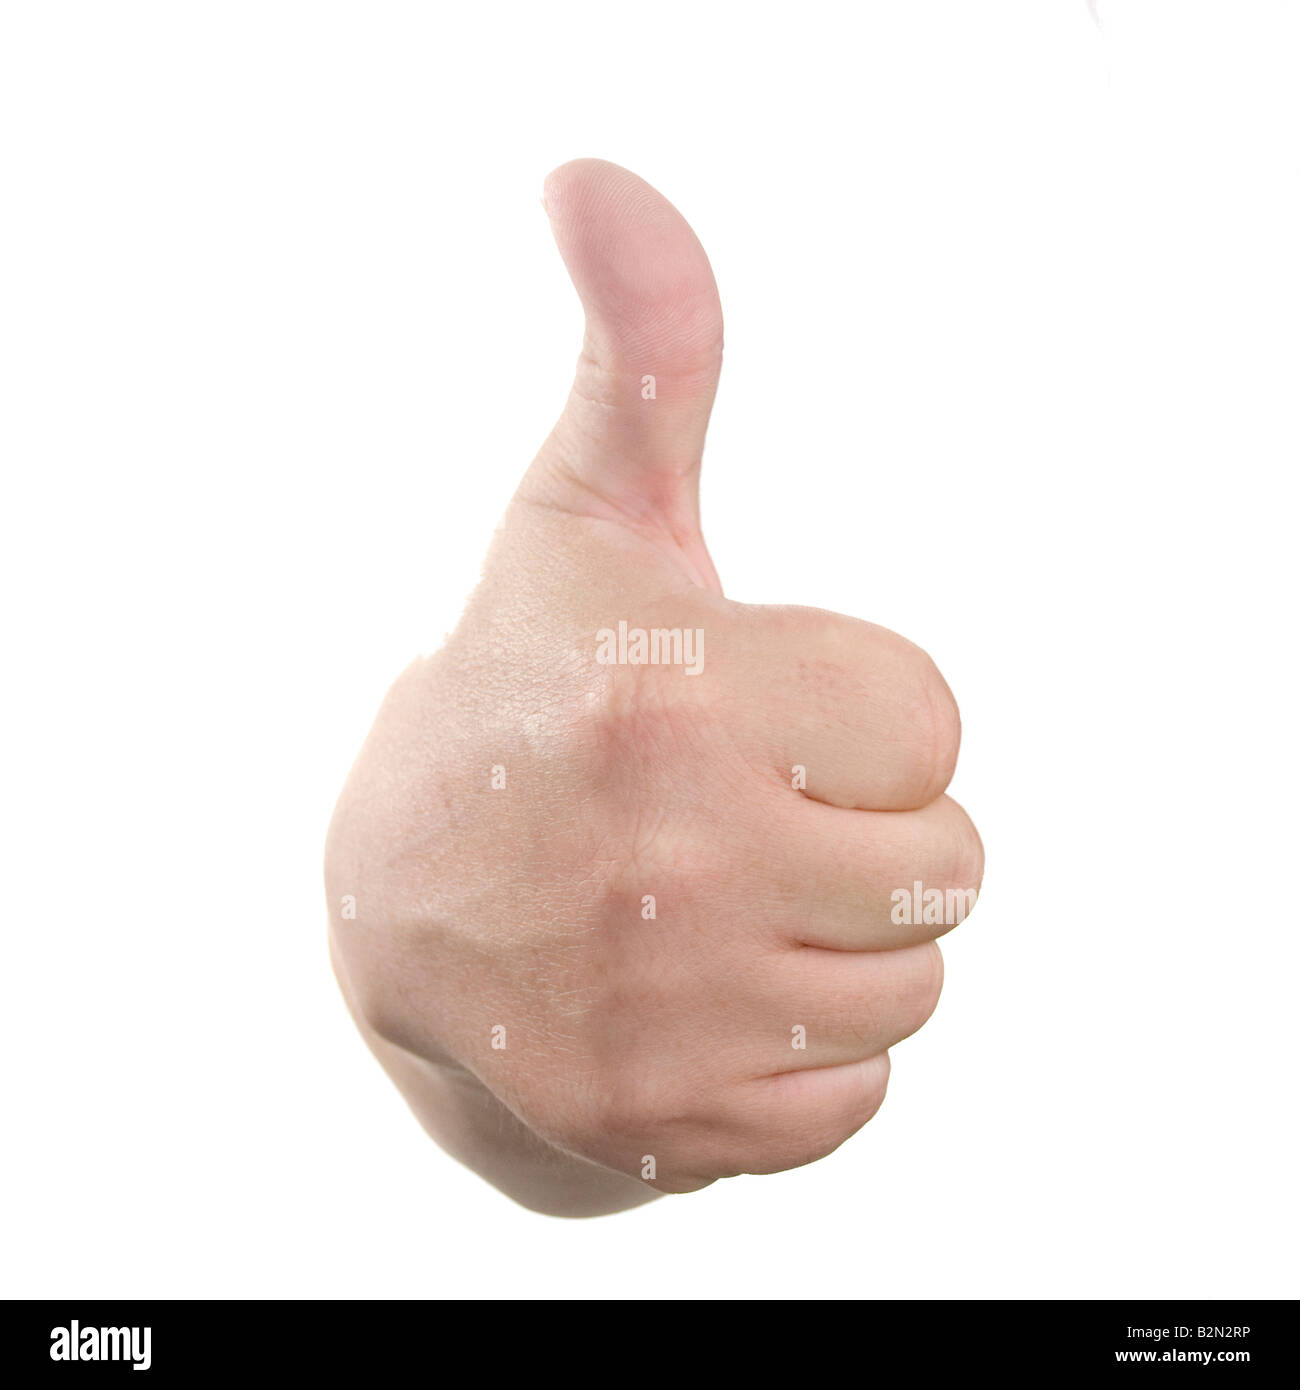 Hand shaped in thumbs up position against white back drop Stock Photo